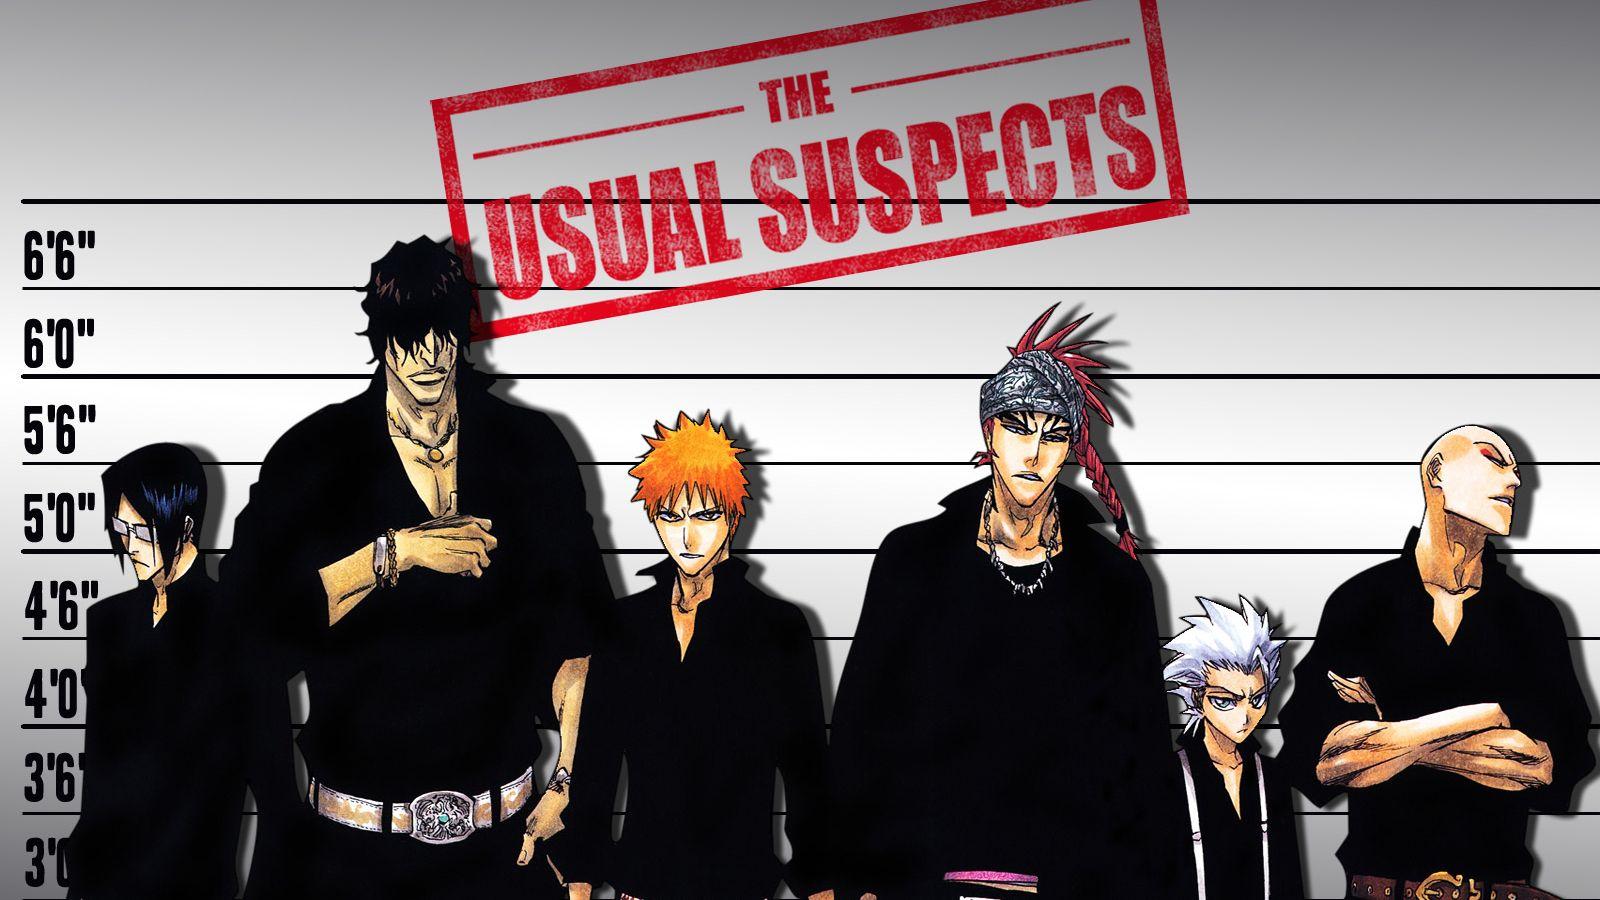 The usual suspects #bleach